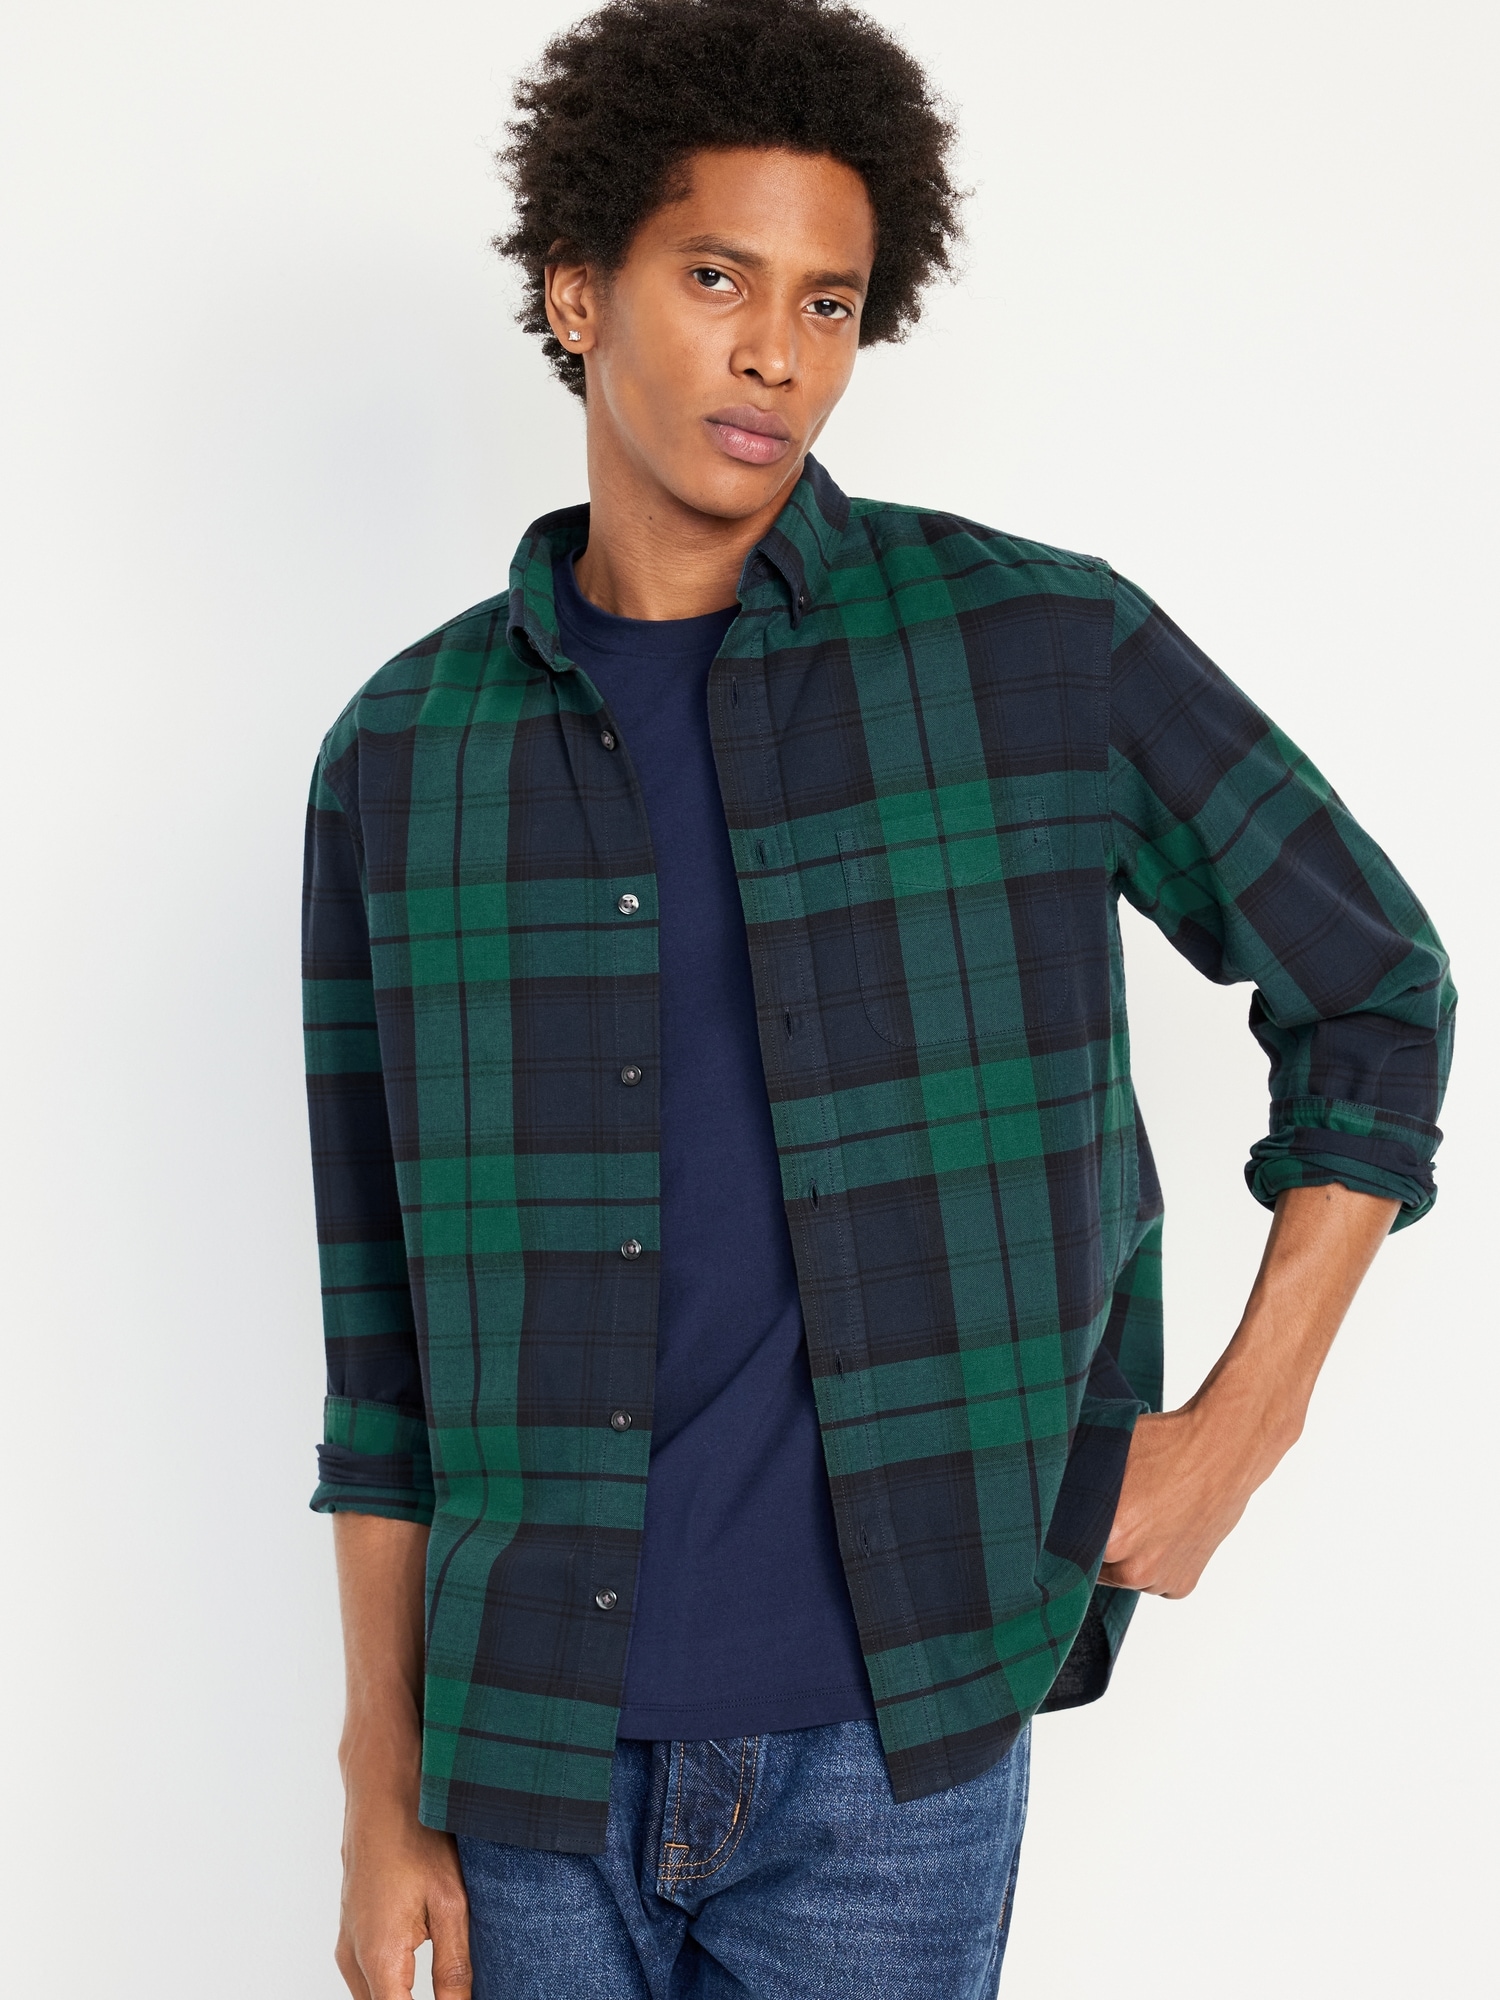 Relaxed Fit Oxford shirt